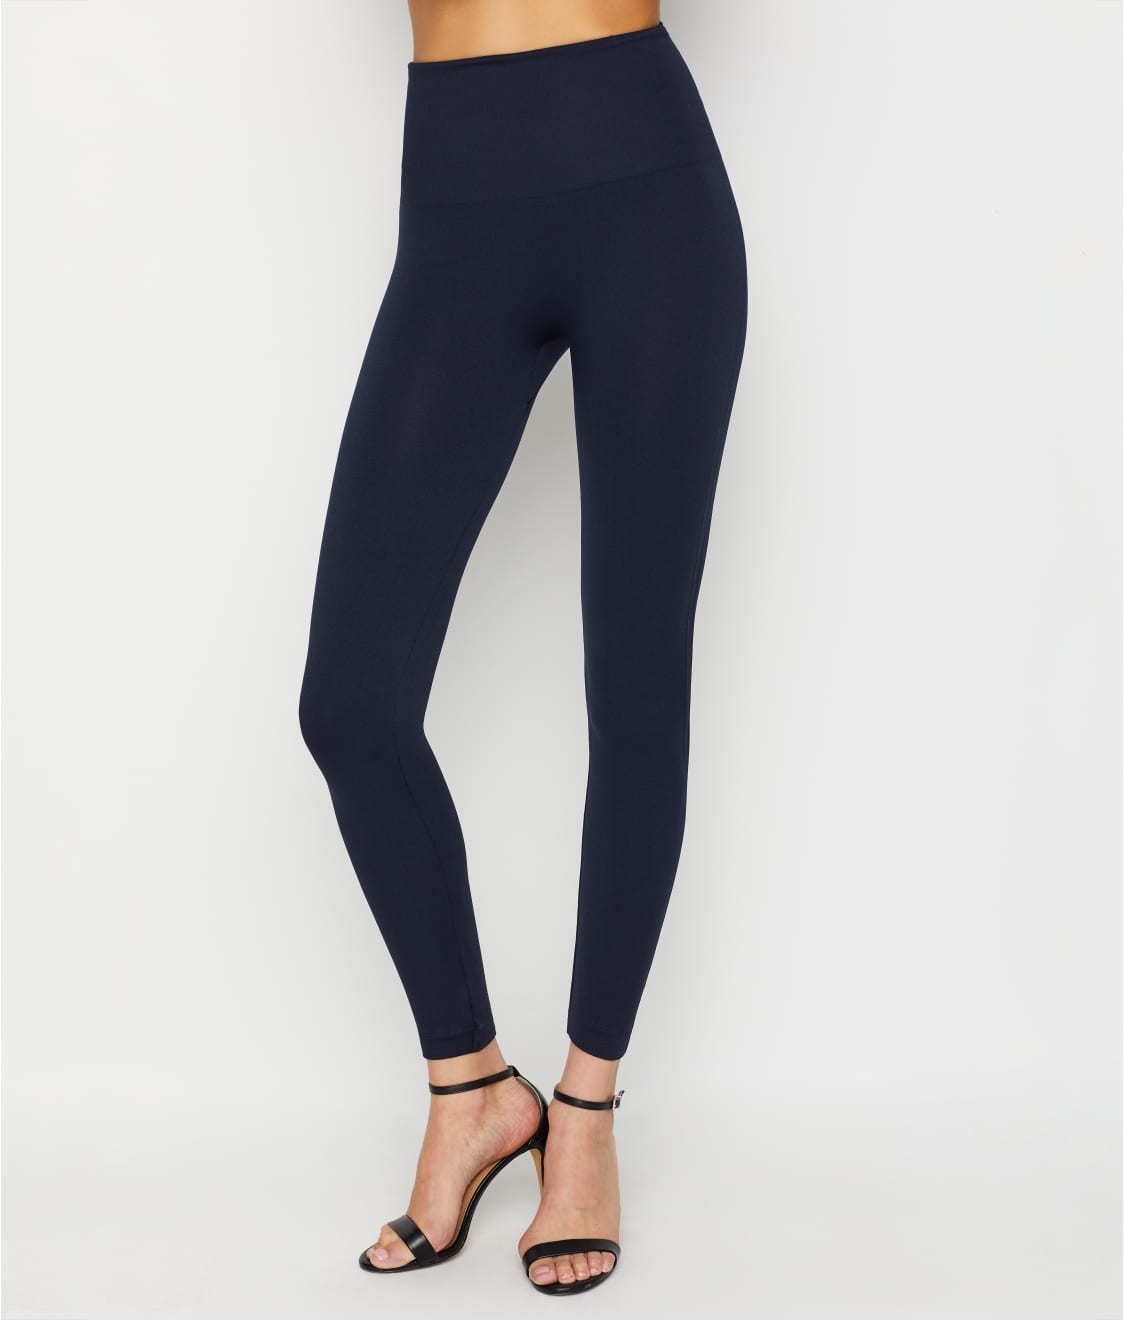 SPANX - Look At Me Now Seemless Leggings - Port Navy